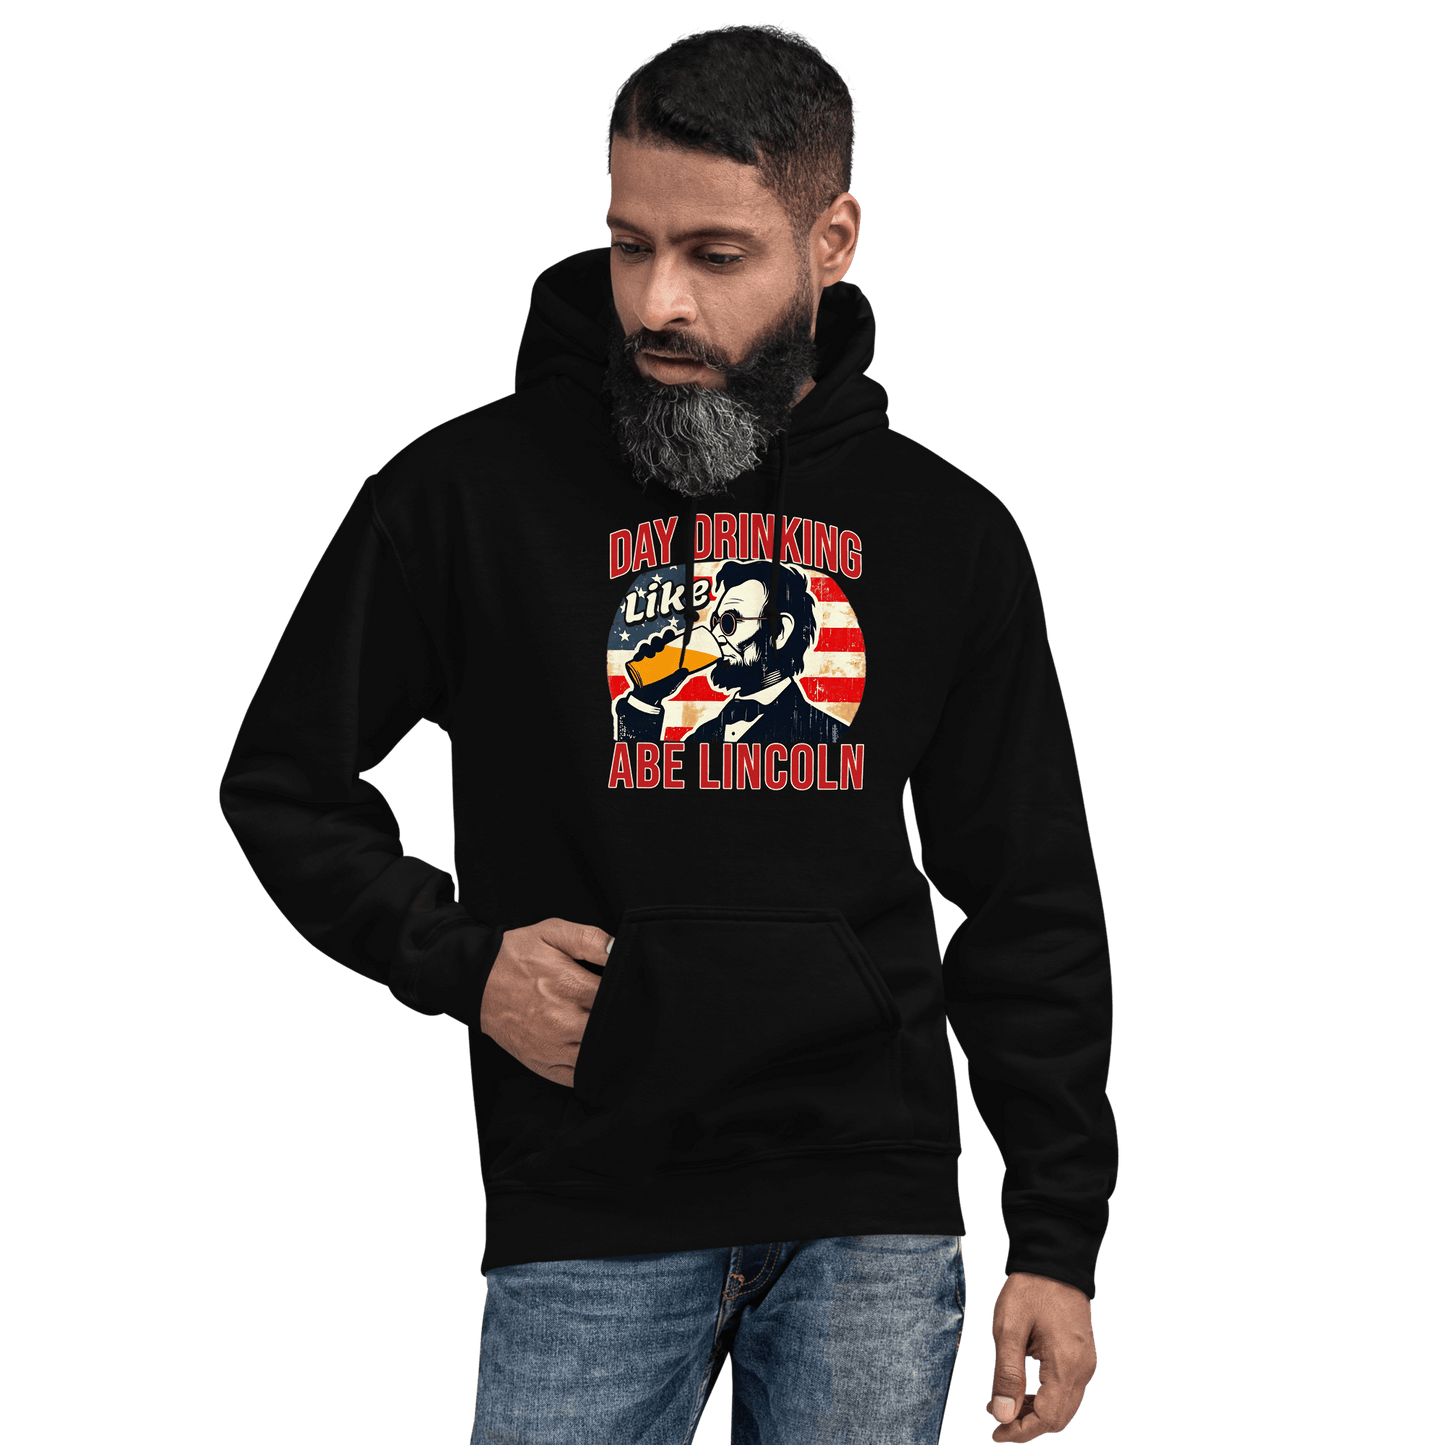 Hoodie with Day Drinking Like Abe Lincoln text, image of Abe Lincoln drinking a glass of beer, and distressed American flag background. Perfect for 4th of July